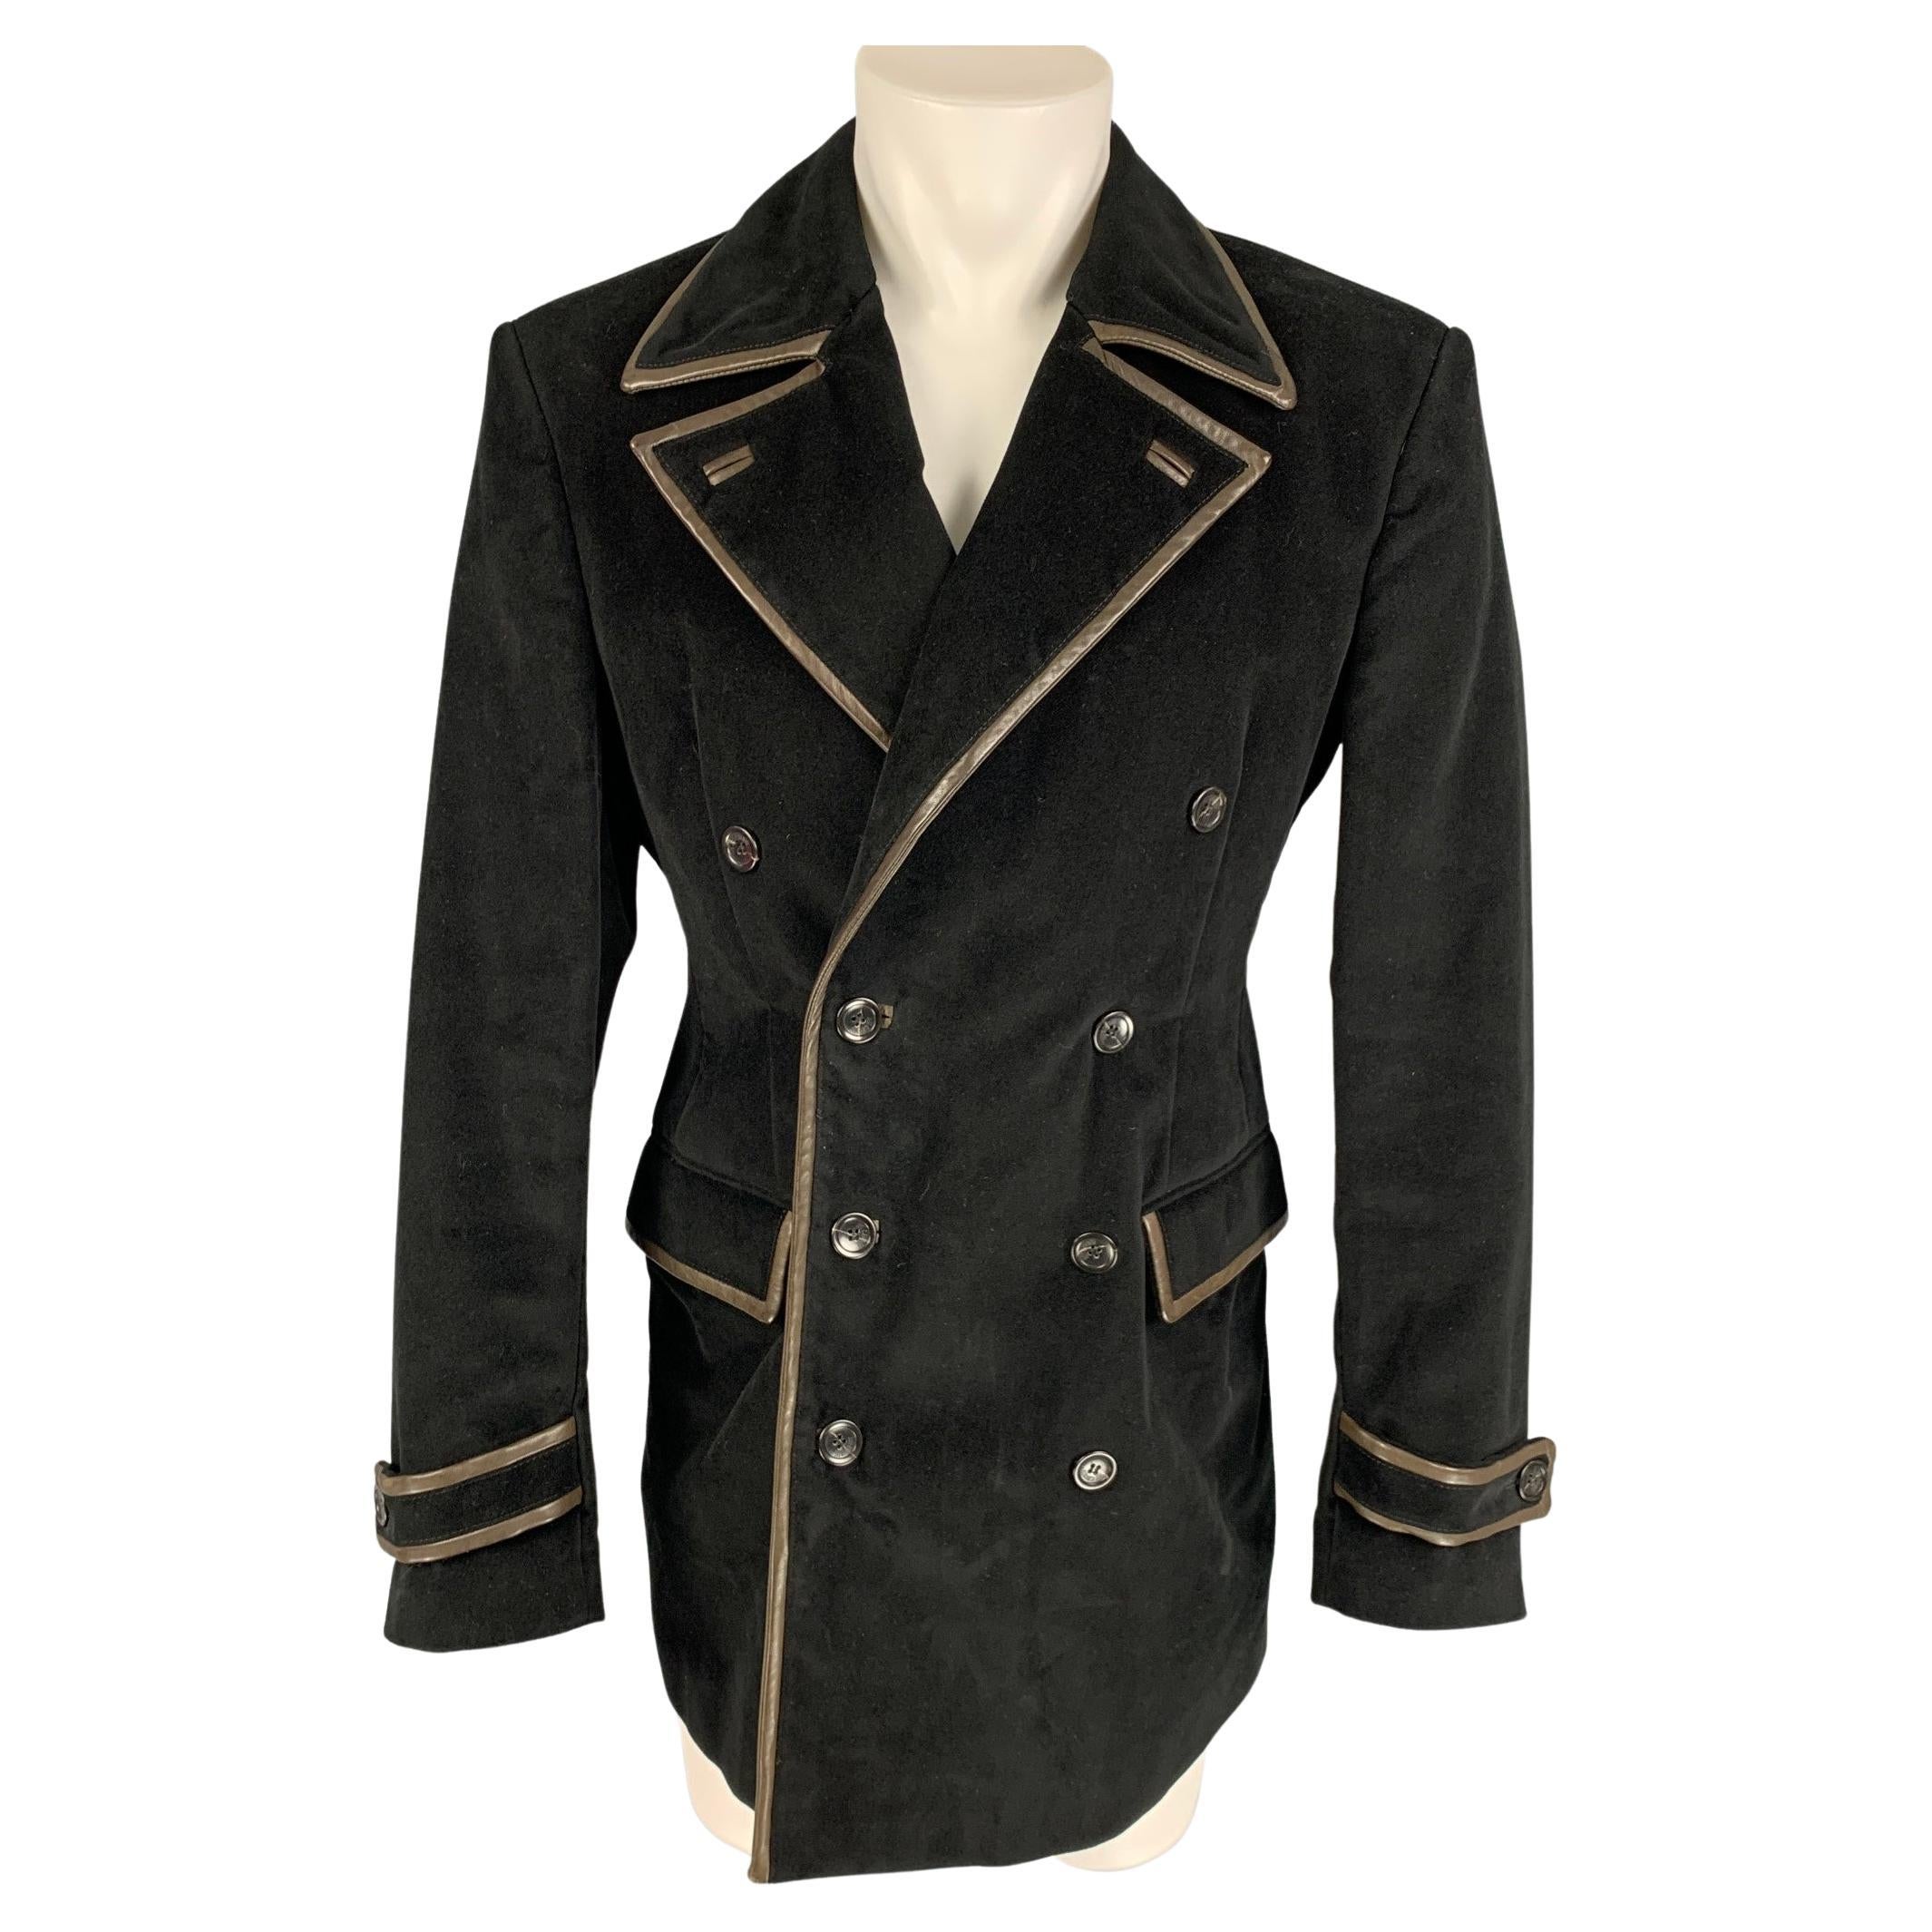 JUST CAVALLI Size 40 Black Brown Viscose Cotton Double Breasted Coat